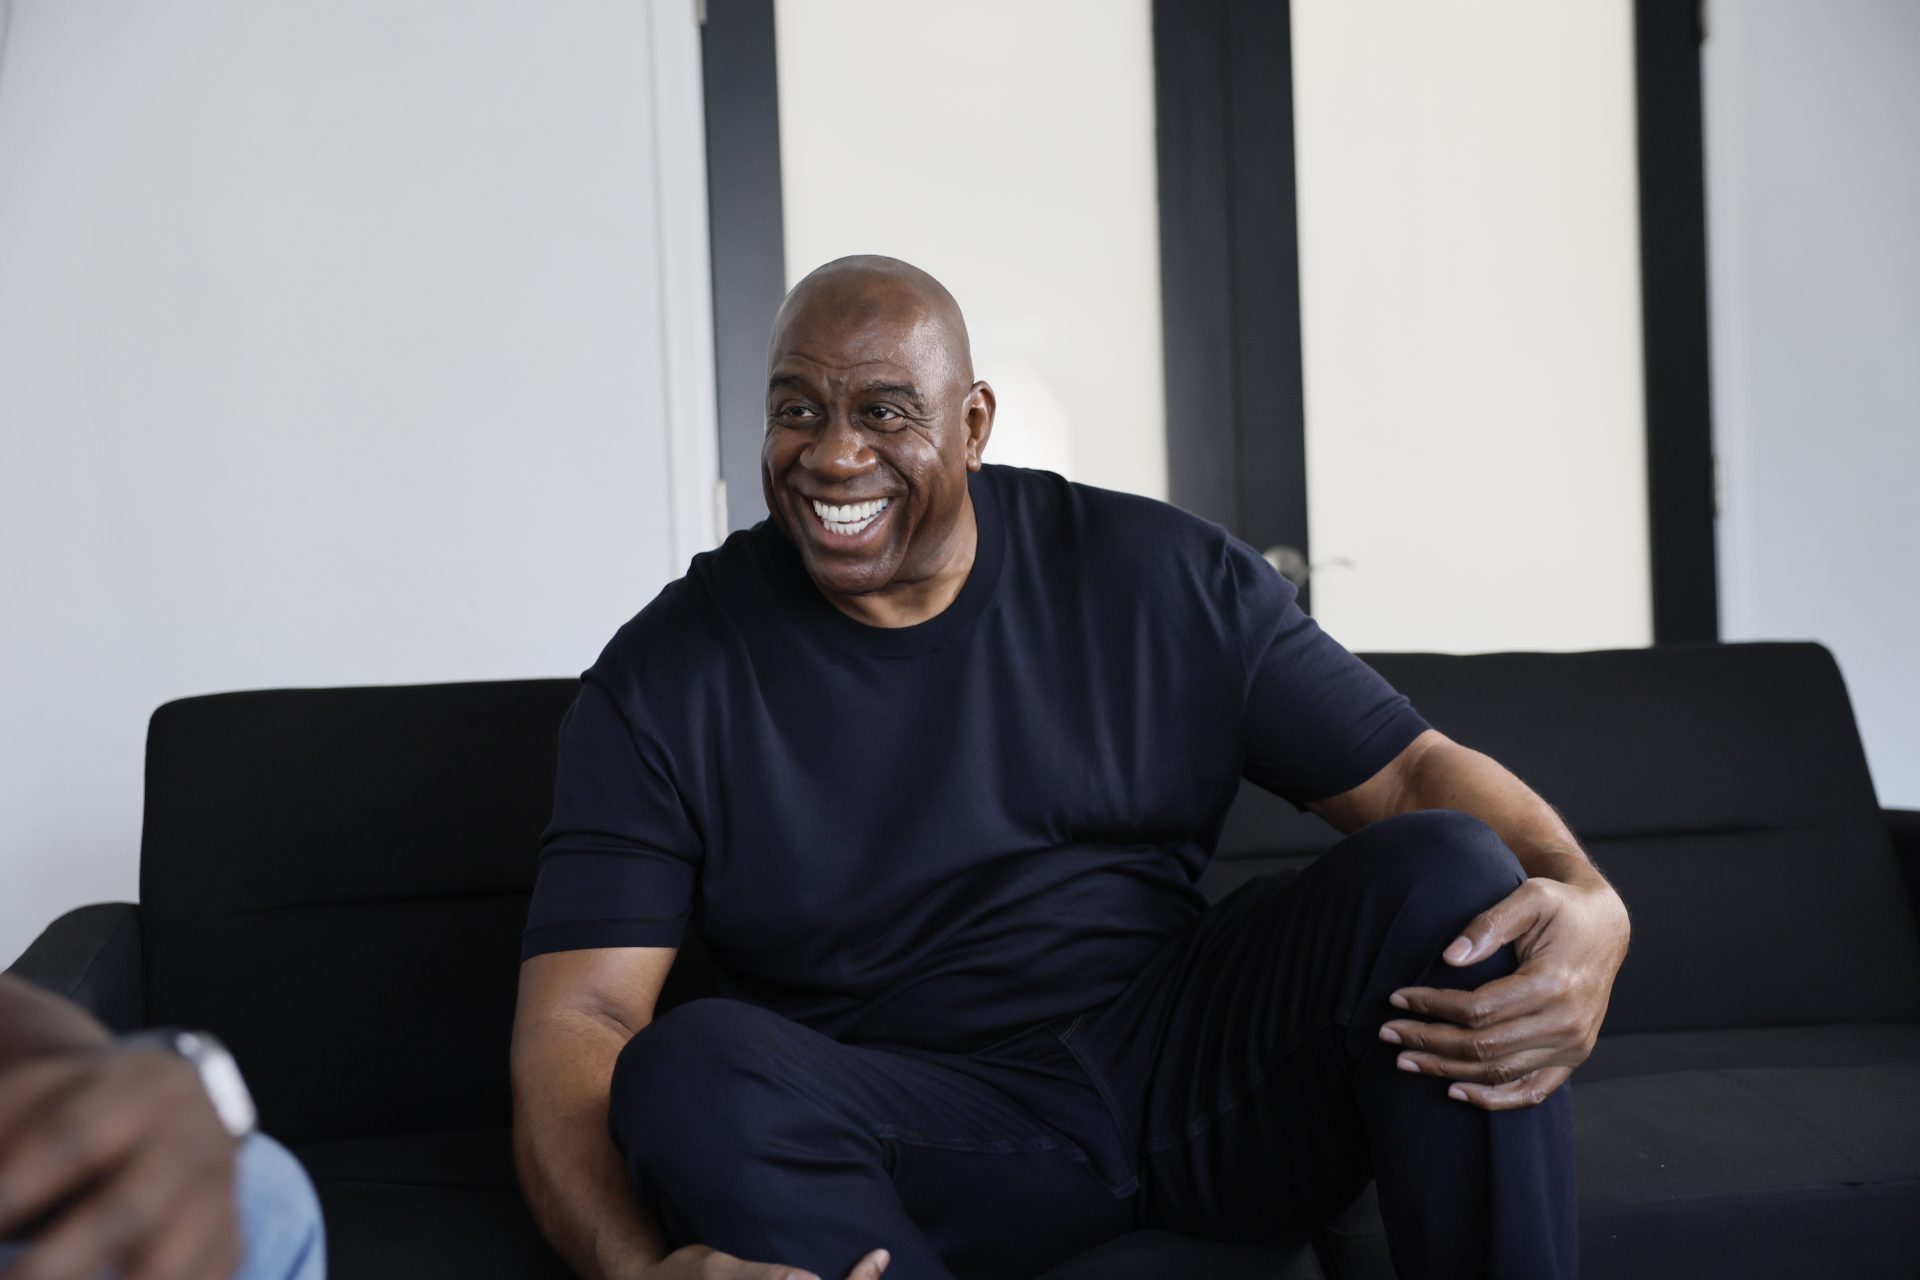 Magic Johnson becomes the fourth athlete to join the billionaire club